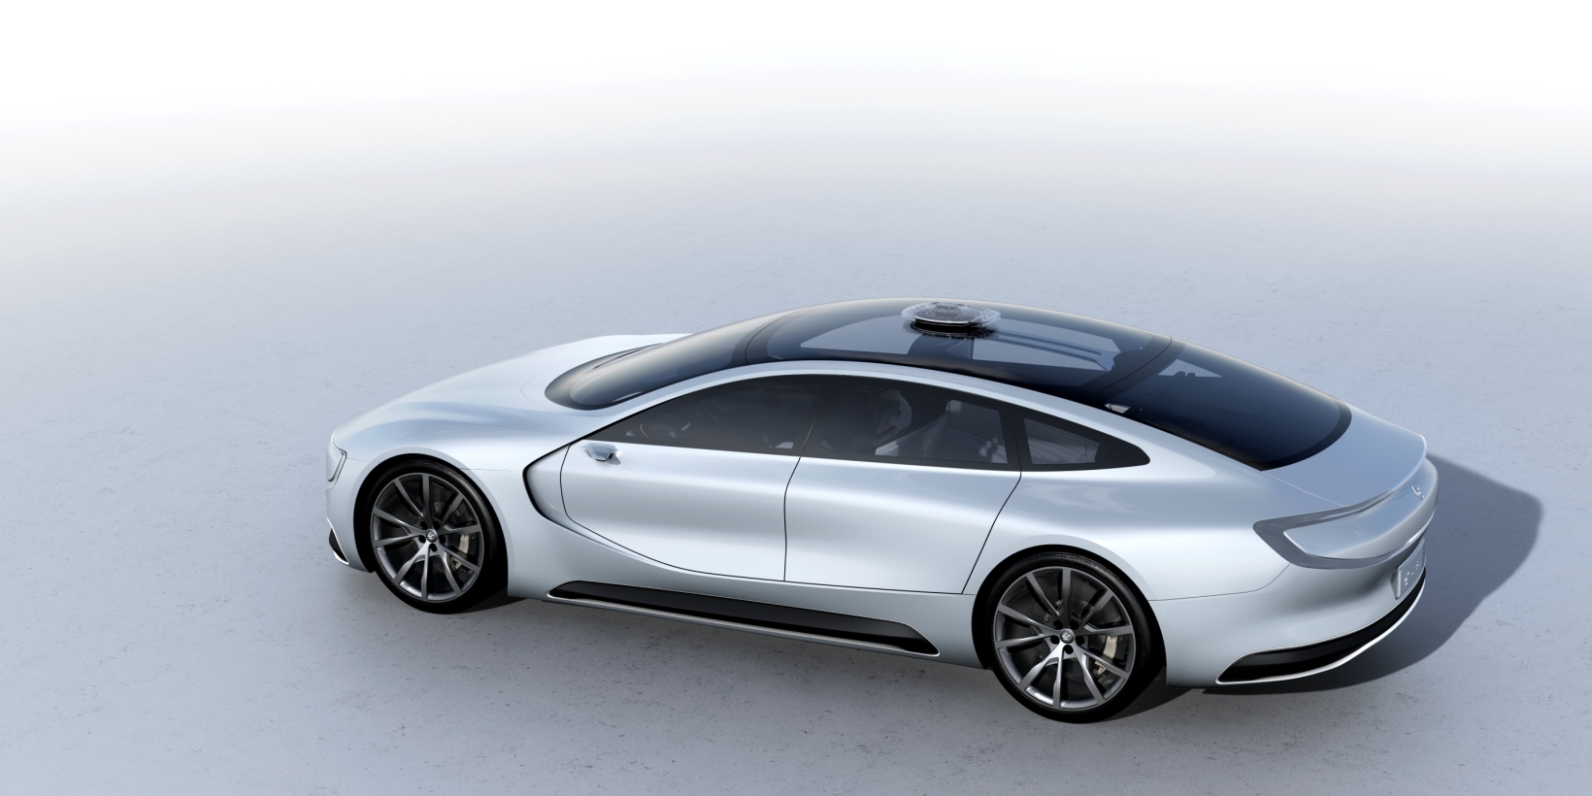 LeEco LeSEE Concept (2016)